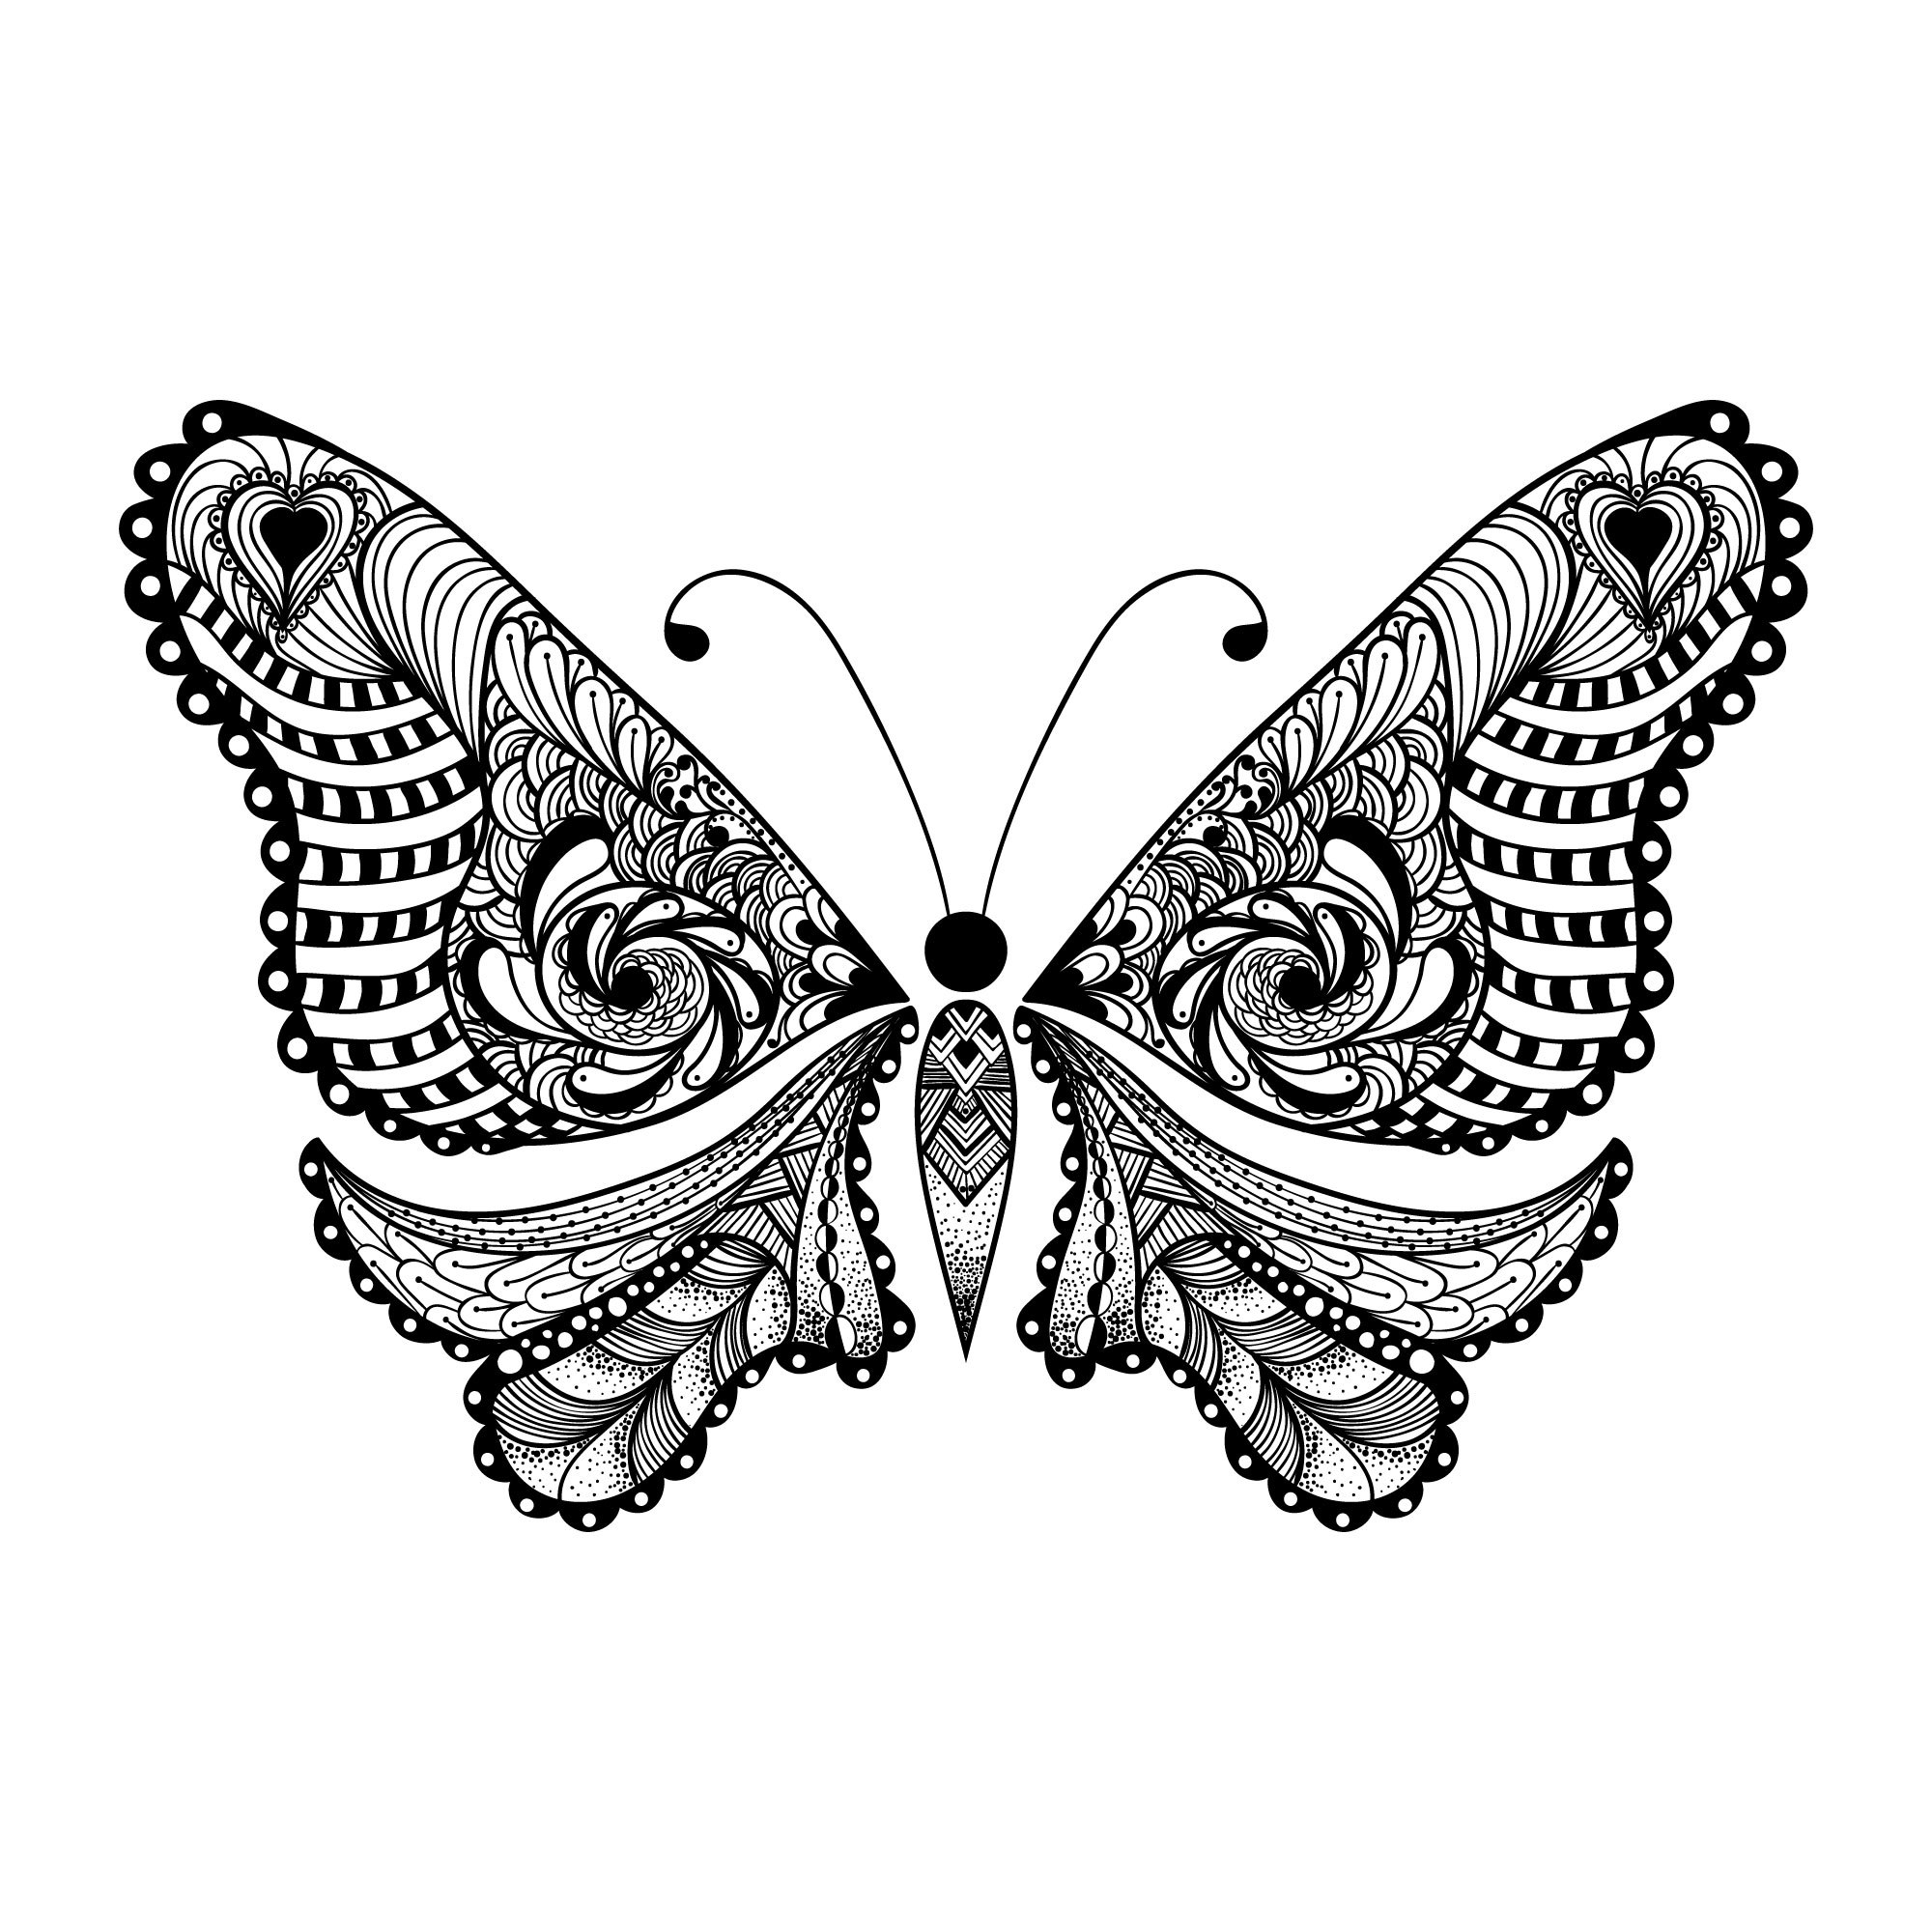 Download Zentangle Butterfly (.eps) Free Vector Download - 3axis.co